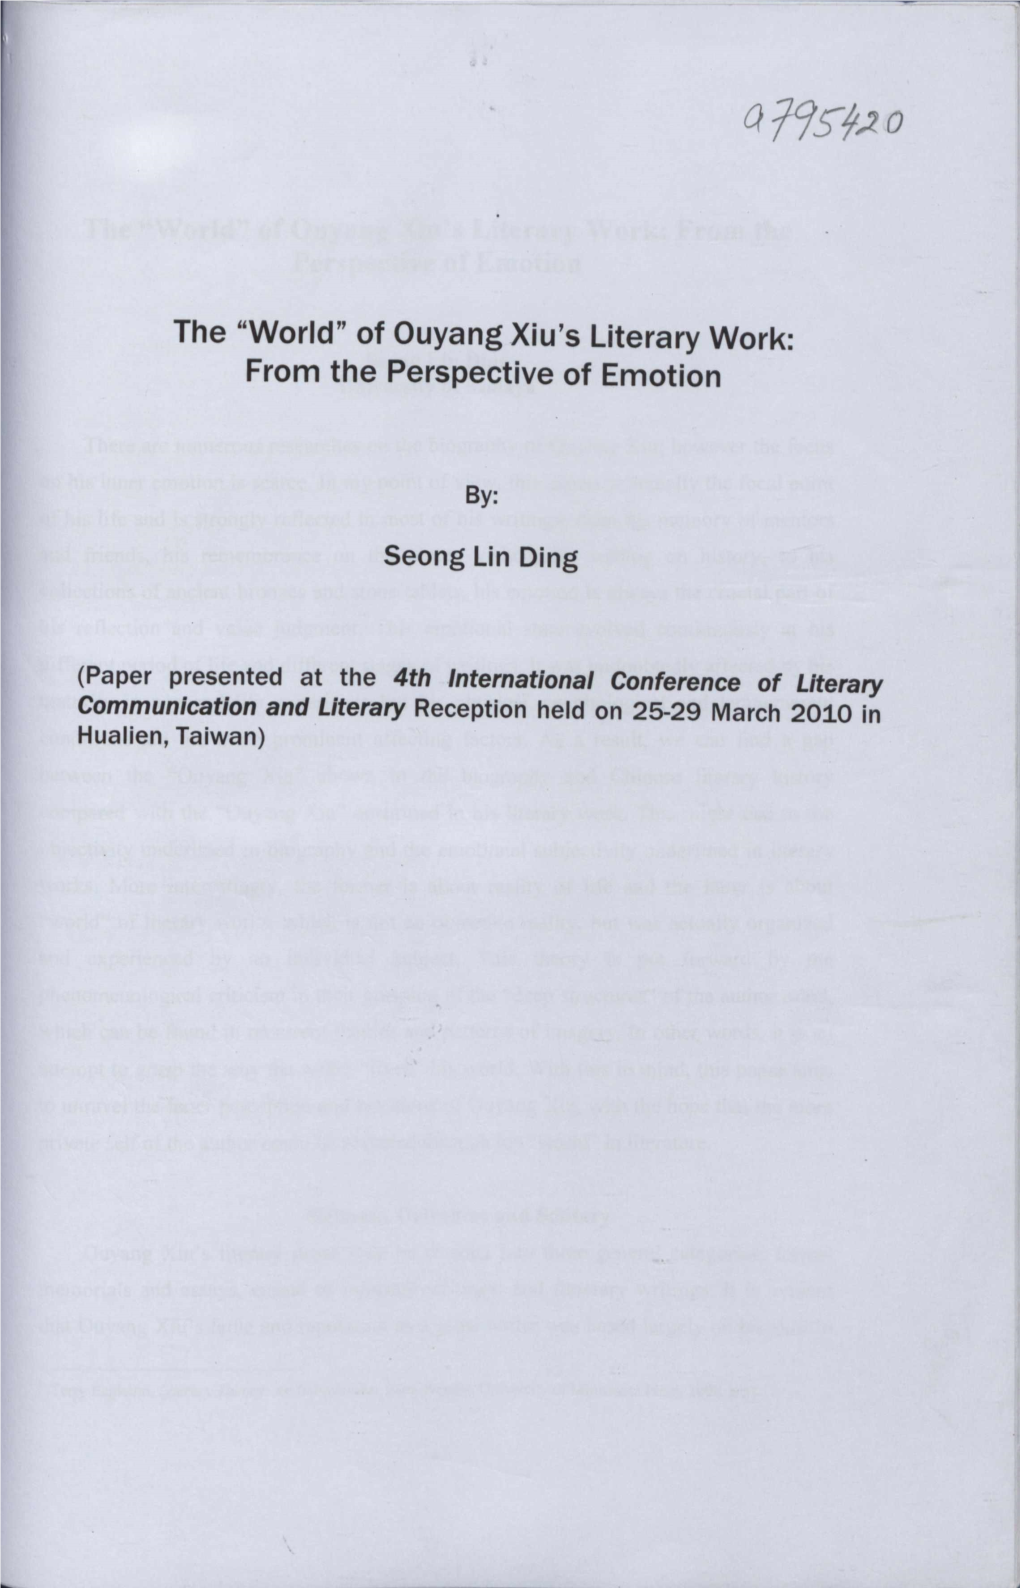 Of Ouyang Xiu's Literary Work: from the Perspective of Emotion